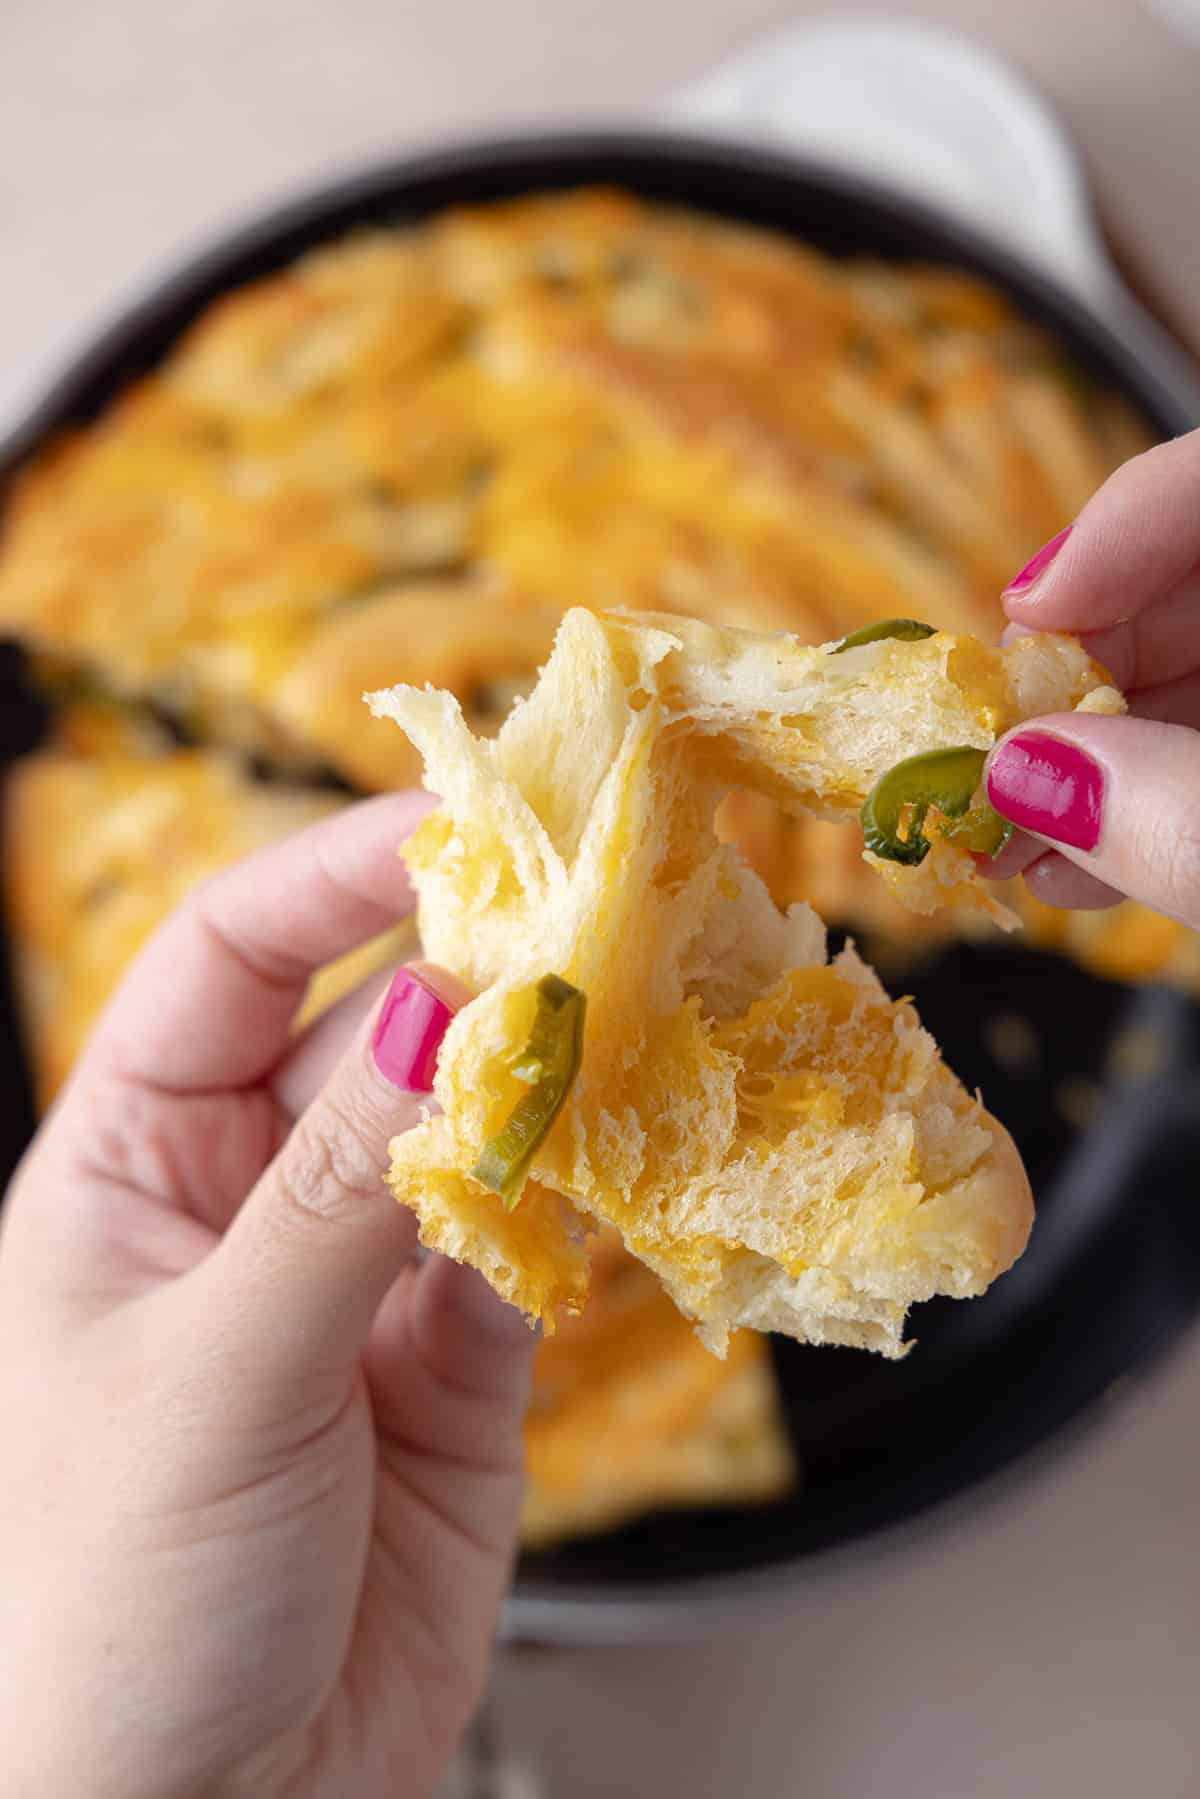 Hands holding a piece jalapeno cheddar twist bread, showing light fluffy texture.